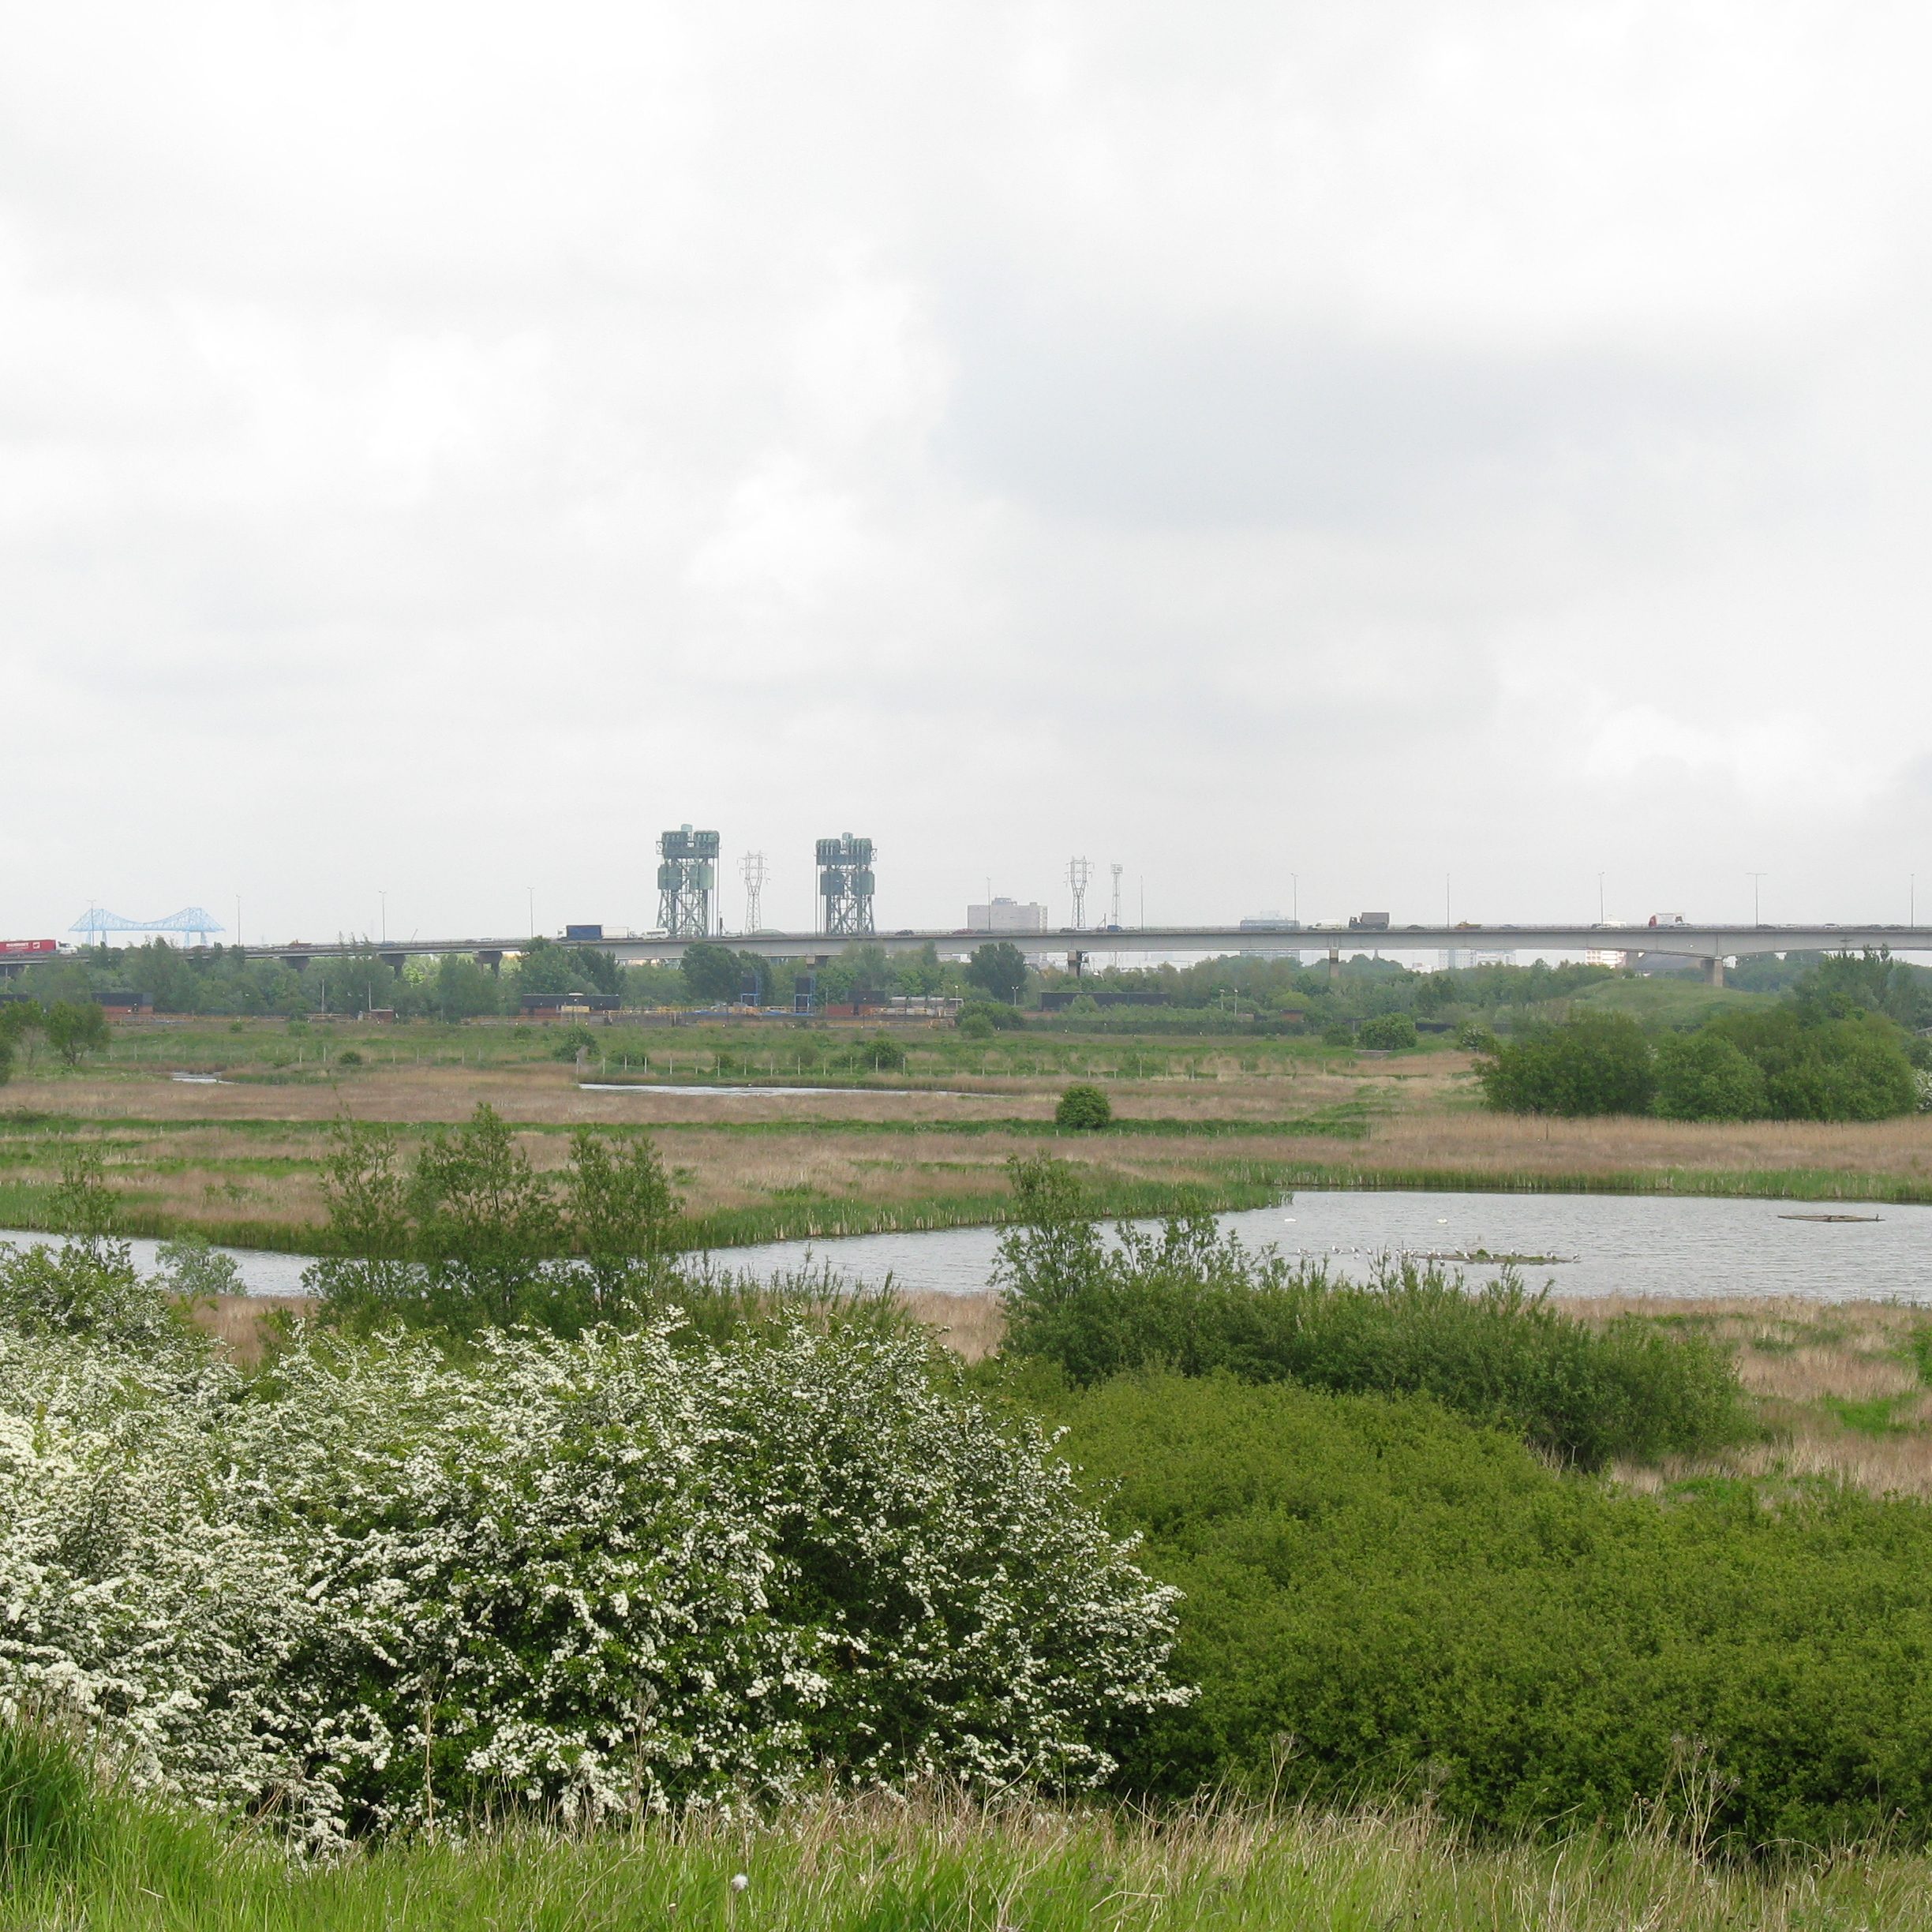 A view over Portrack Marsh. Hawthorne is in flower in the foreground. The A19 and Newport Bridge are both visible in the background.